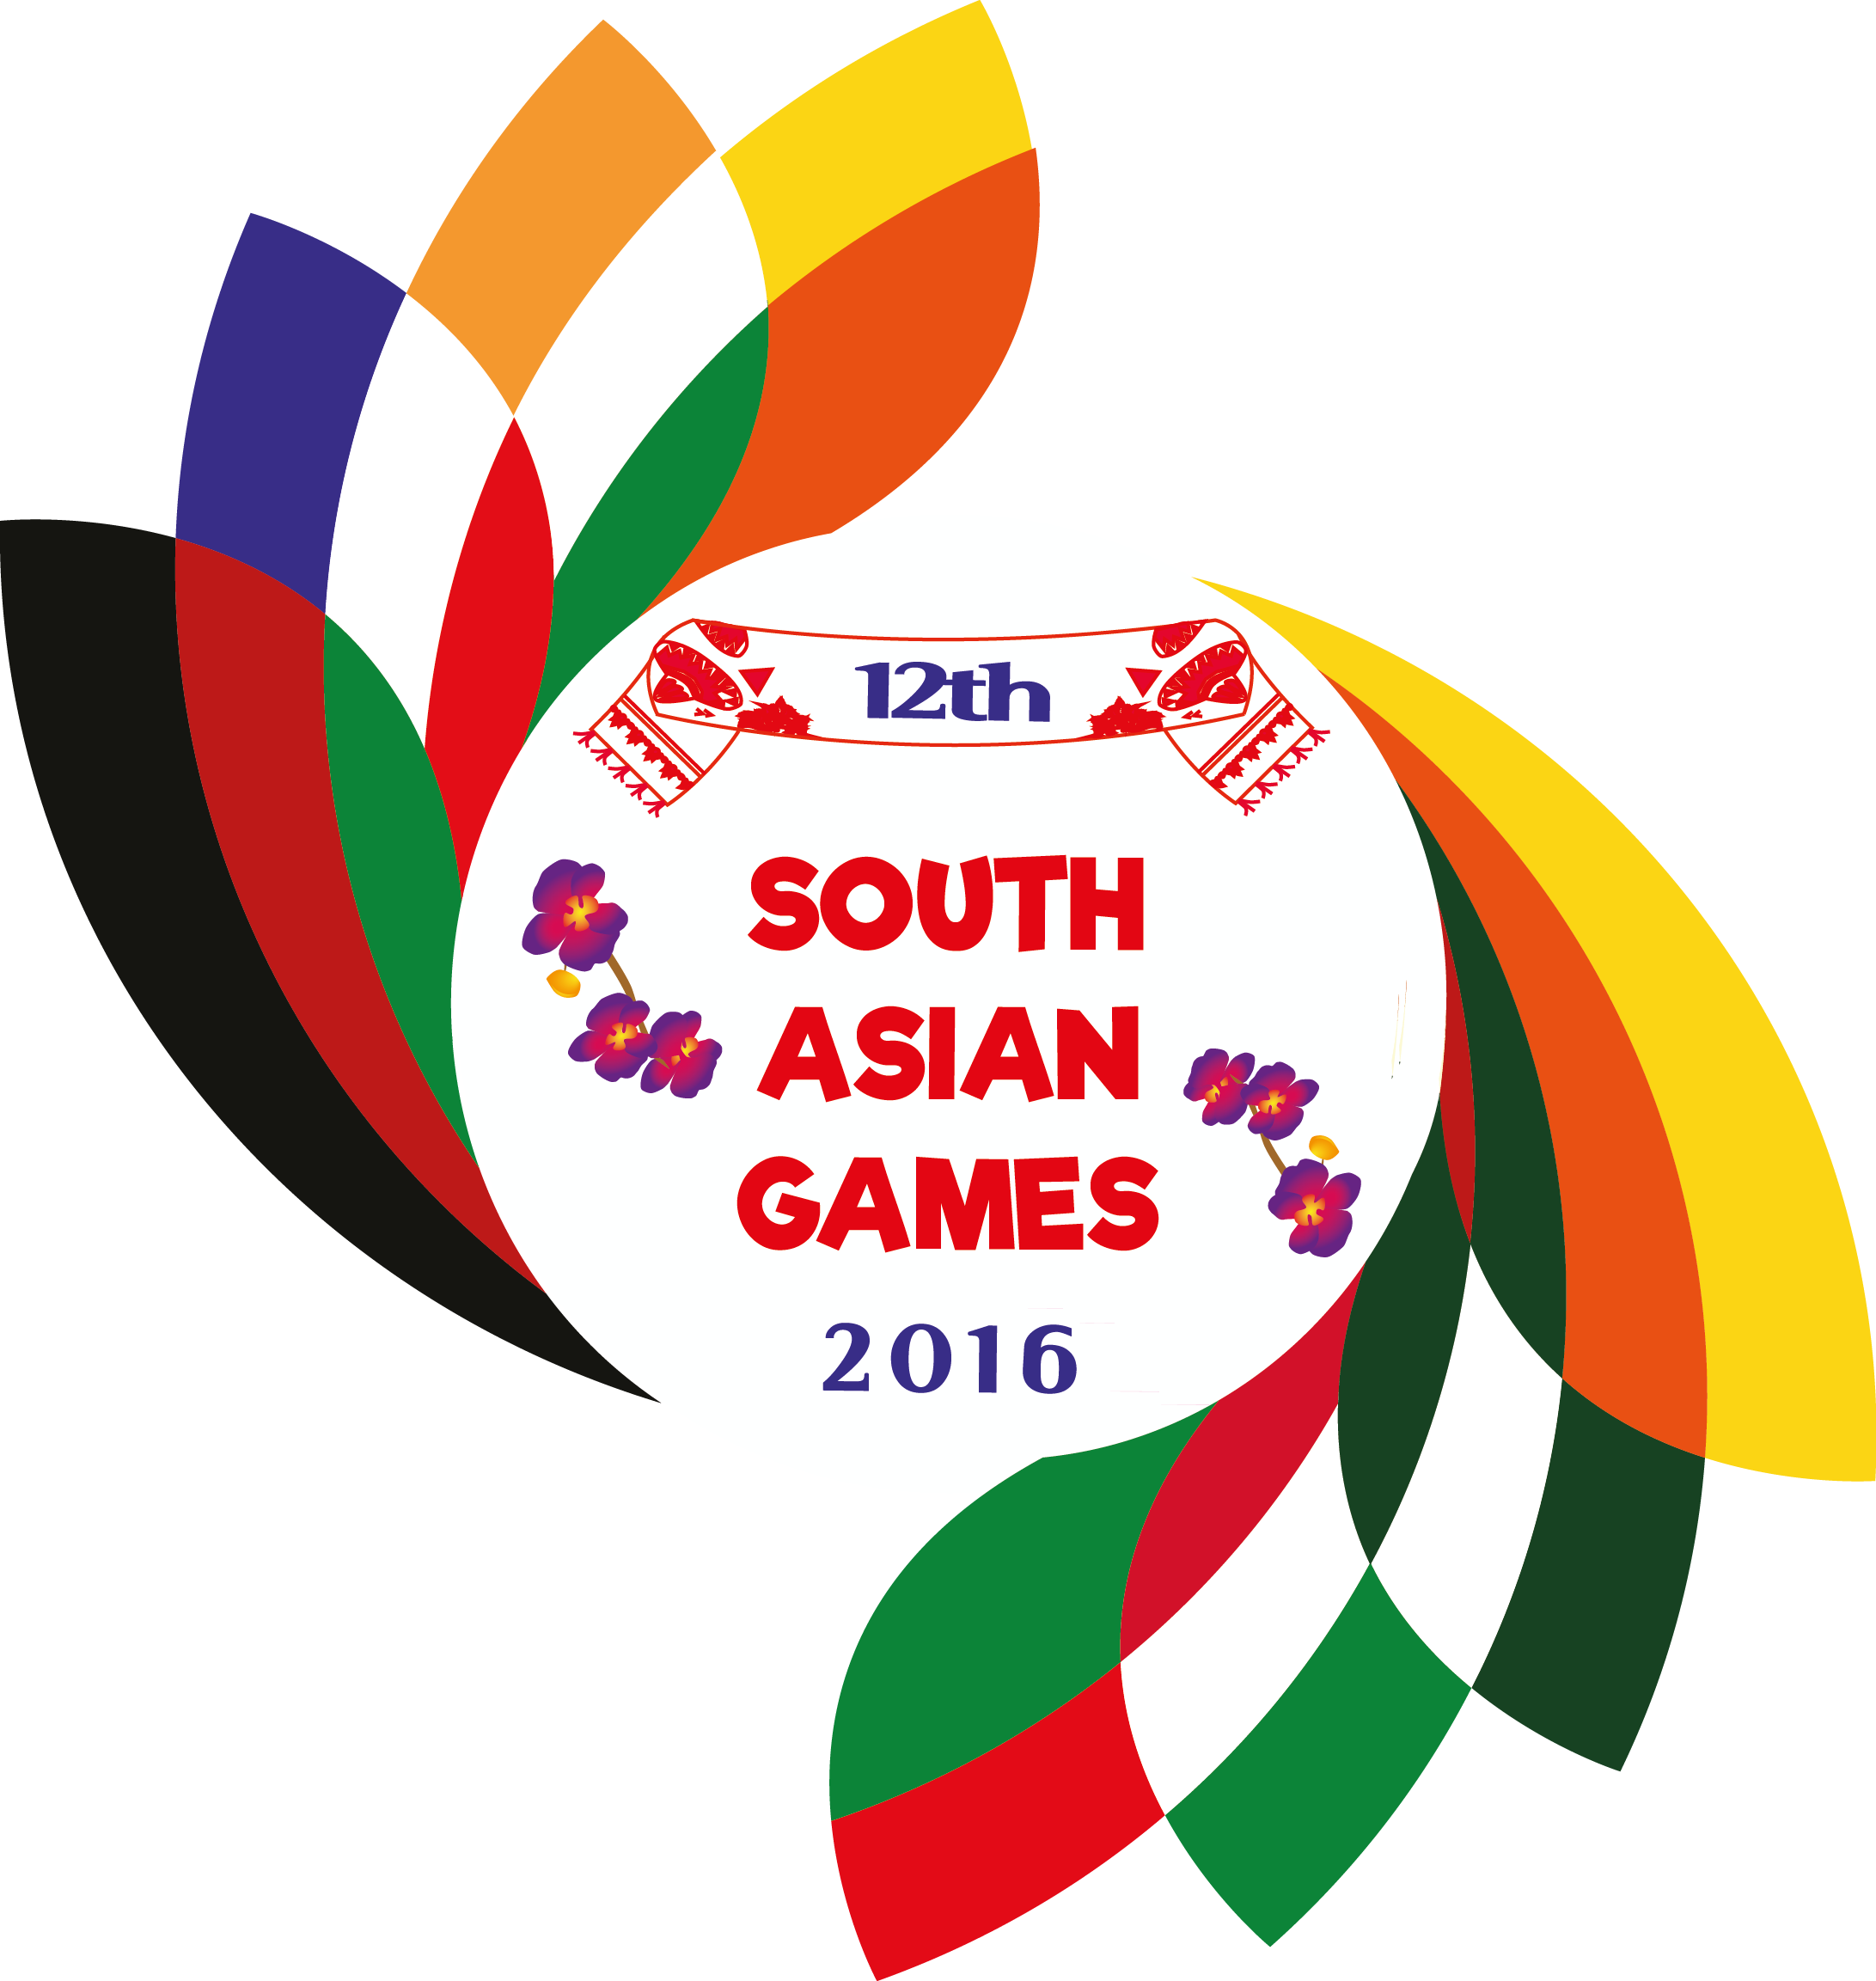 PM Modi to inaugurate 12th South Asian Games on Feb 5